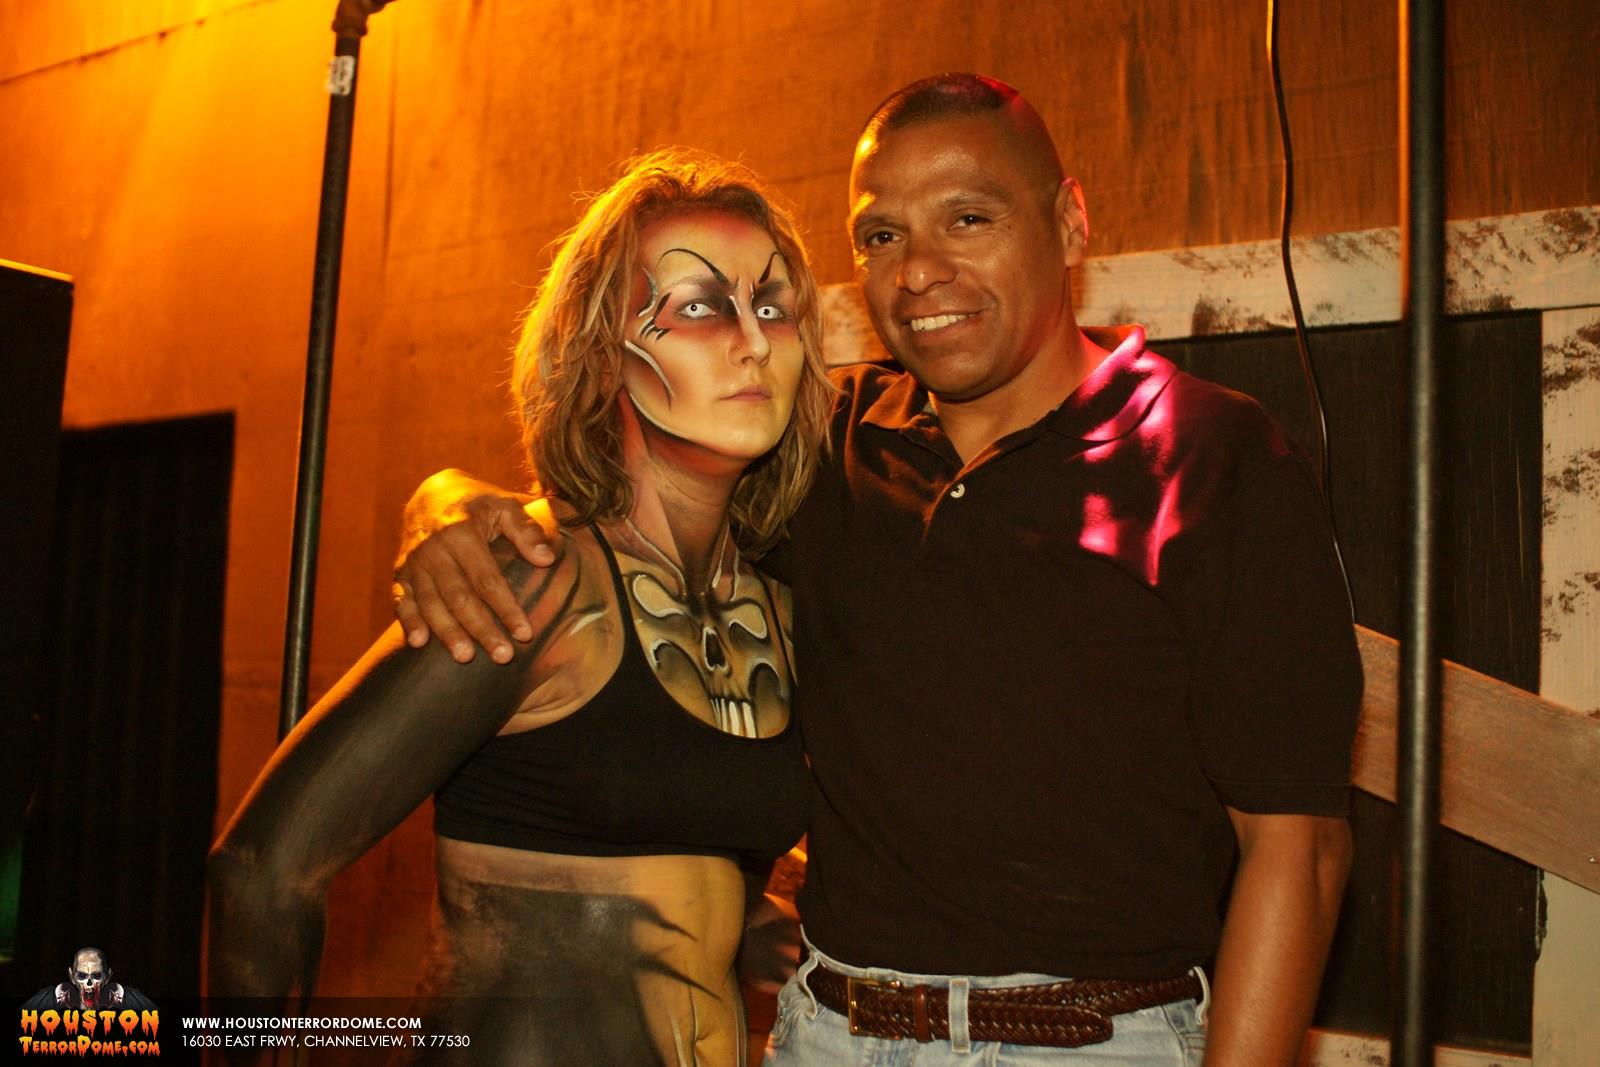 Zombie dancer and supporter at our haunted house.